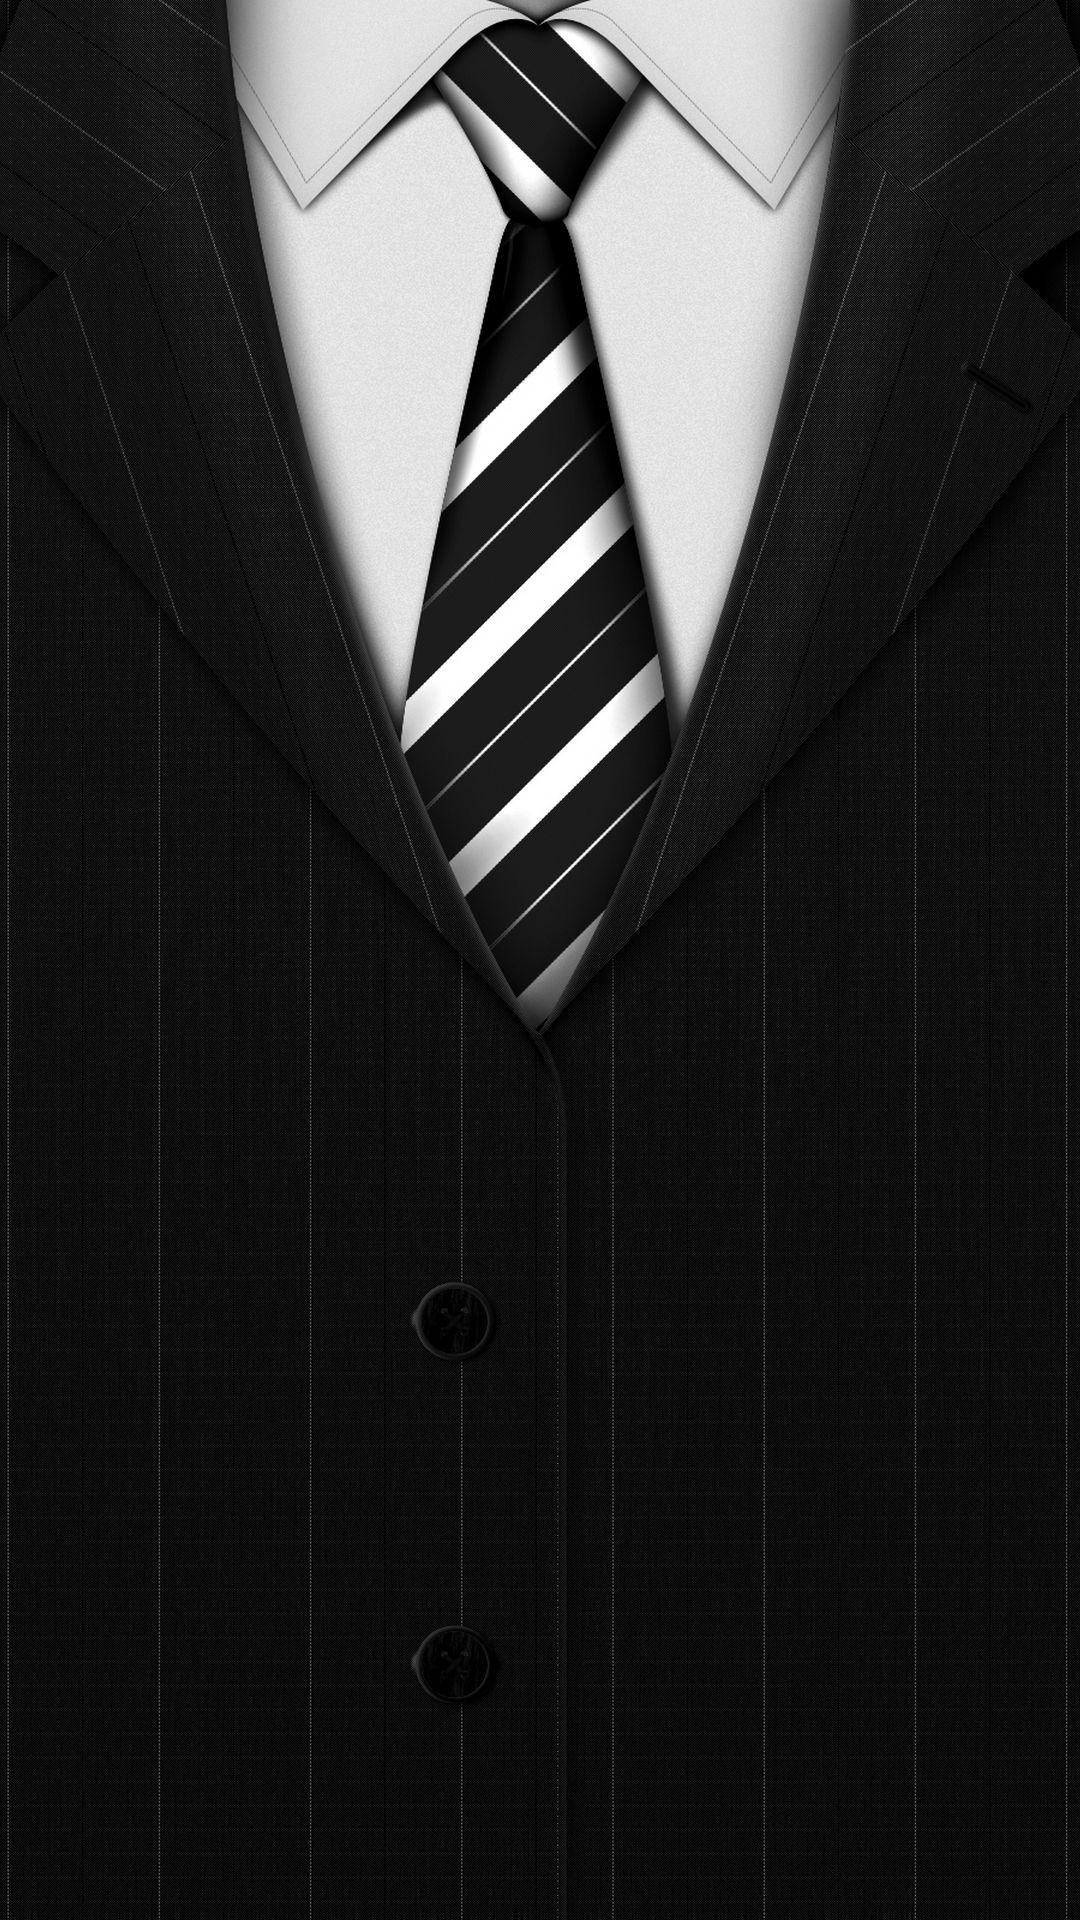 Man Suit Shirt Tie Lines Android Wallpaper free download